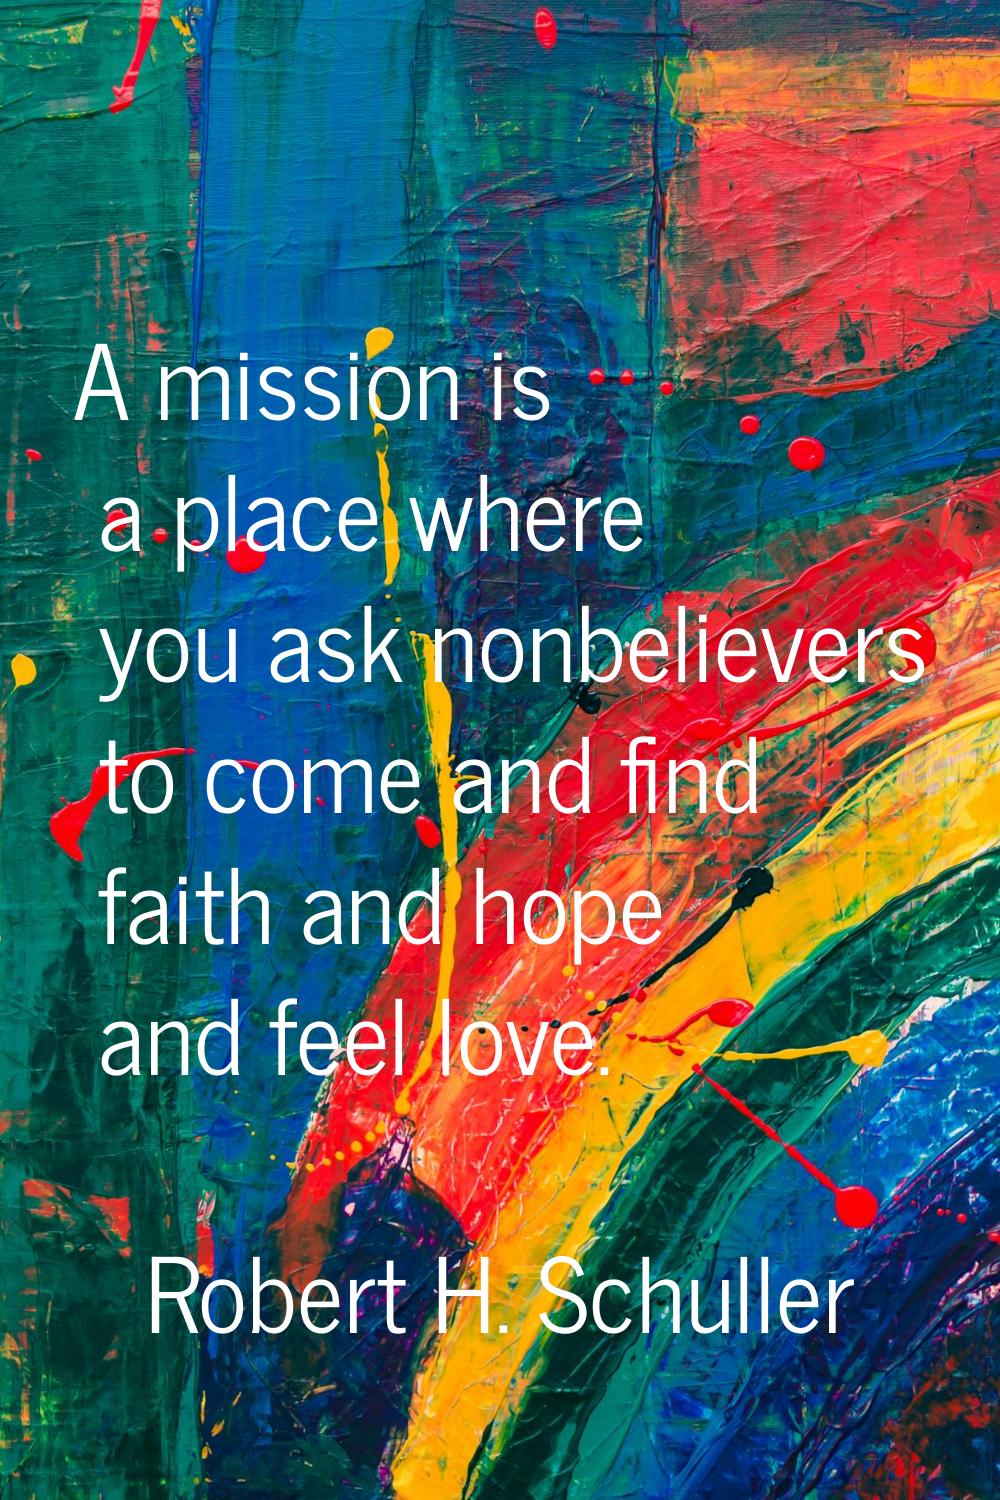 A mission is a place where you ask nonbelievers to come and find faith and hope and feel love.